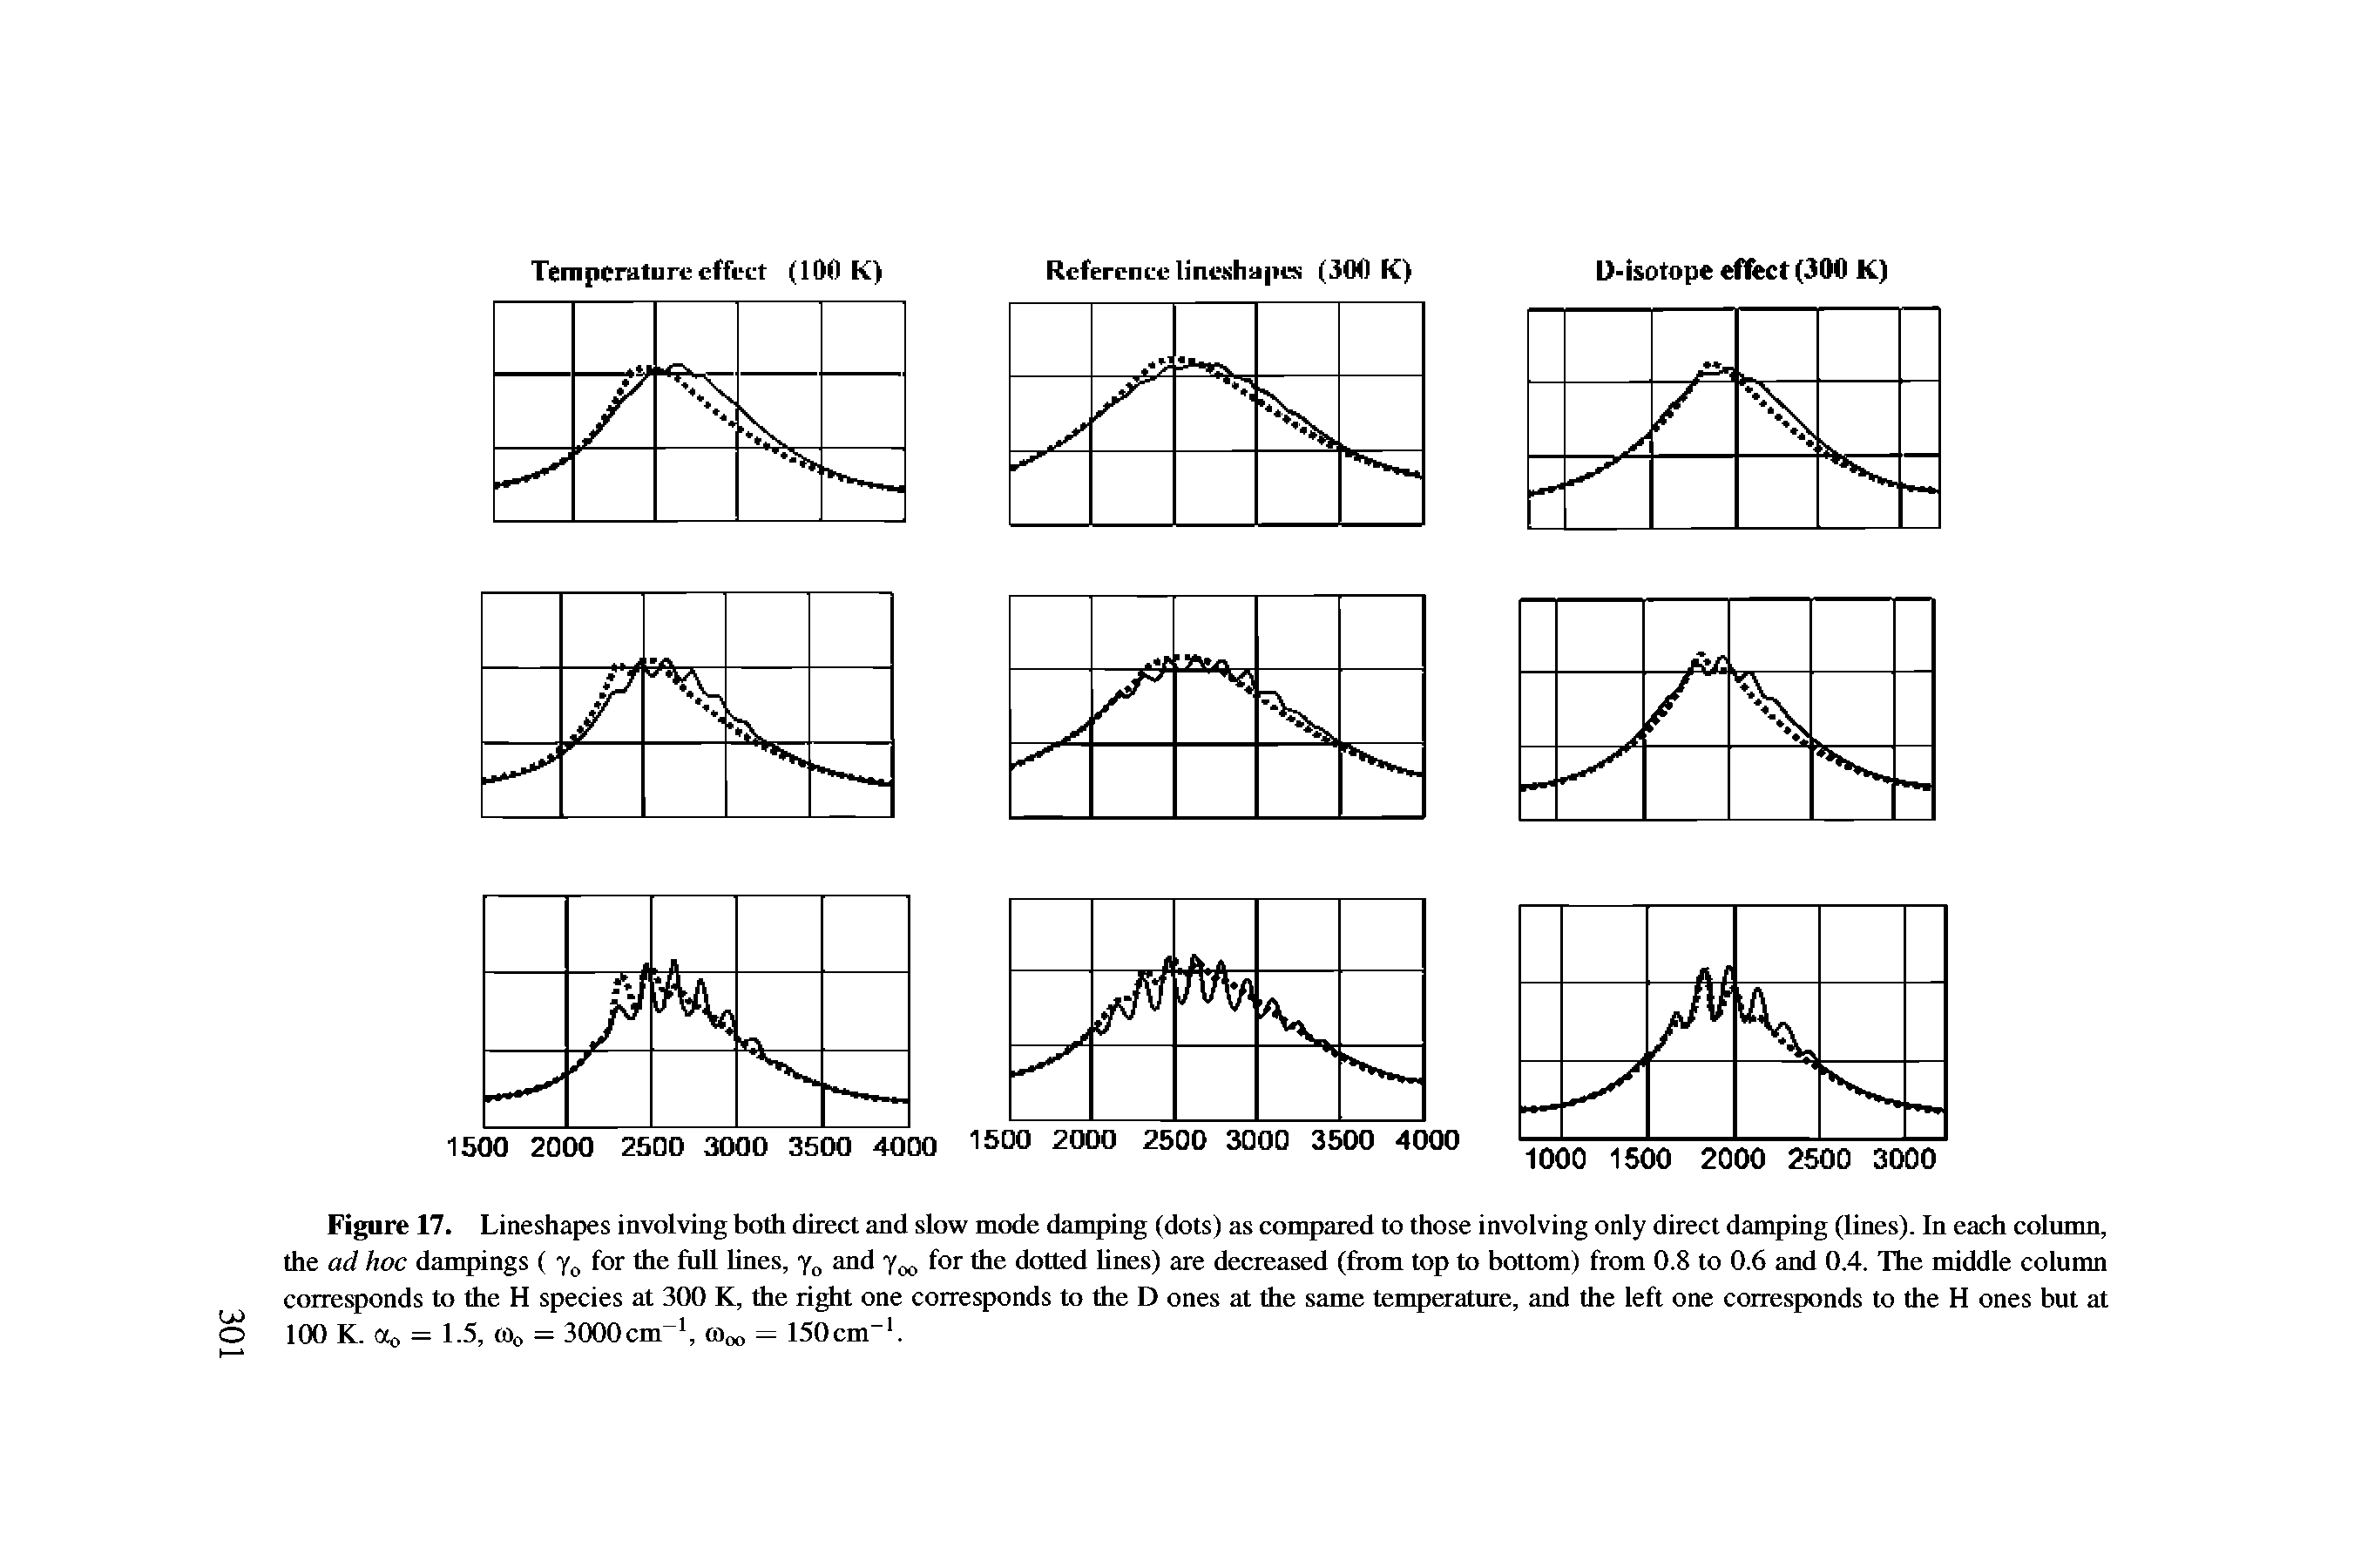 Figure 17. Lineshapes involving both direct and slow mode damping (dots) as compared to those involving only direct damping (lines). In each column, the ad hoc dampings ( y0 for the full lines, ya and yXl for the dotted lines) are decreased (from top to bottom) from 0.8 to 0.6 and 0.4. The middle column corresponds to the H species at 300 K, the right one corresponds to the D ones at the same temperature, and the left one corresponds to the H ones but at O 100 K. a0 = 1.5, (0o = 3000cm-1, lo, = 150cm 1.